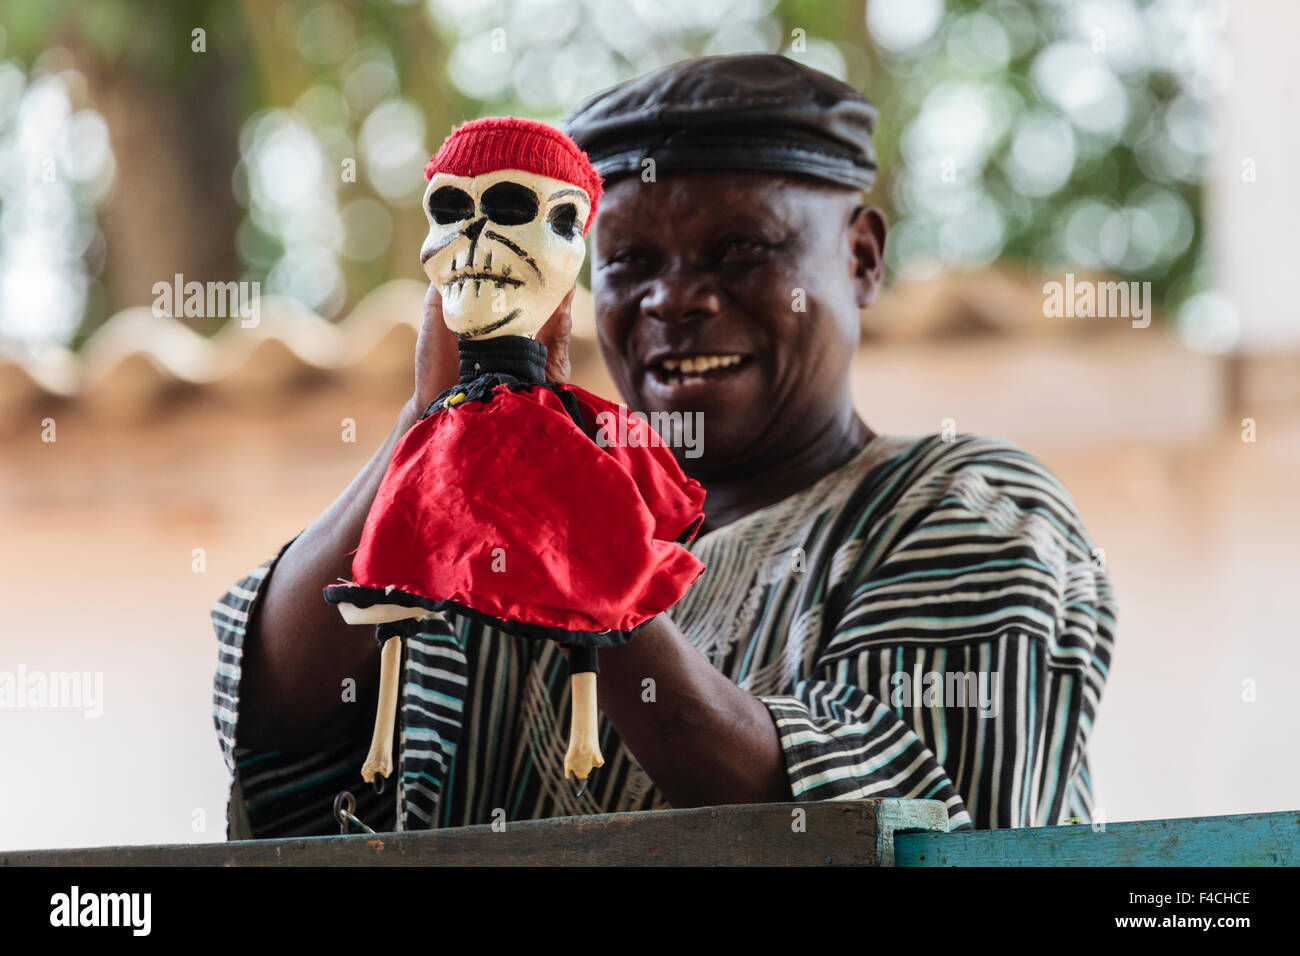 Africa, West Africa, Togo, Lome. Puppeteer Kanlanfei Danaye performing with his company Marionettes du Togo. Stock Photo